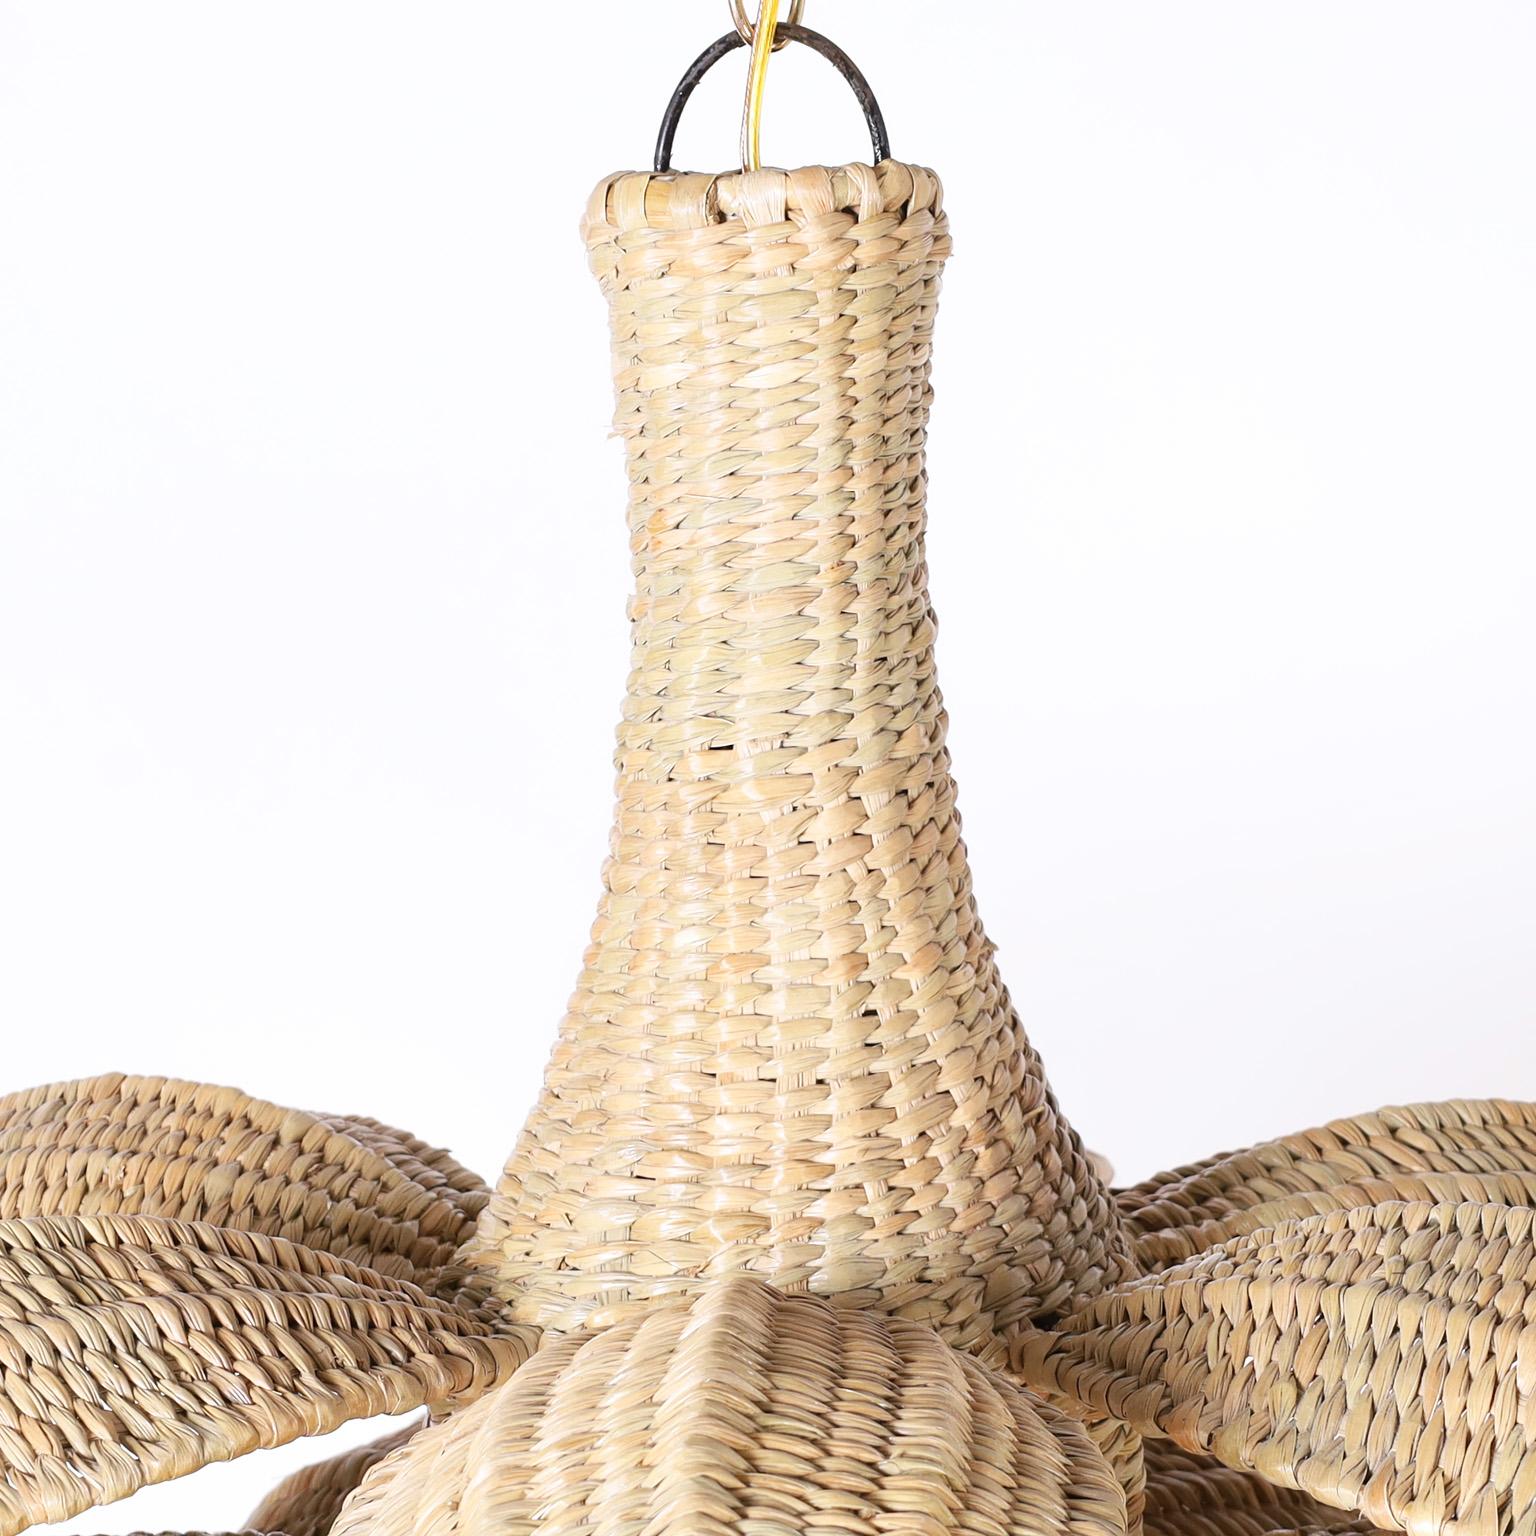 The Sanibel, a wicker palm leaf or lotus pendant light fixture crafted in chuspata reed tightly and expertly woven over a sturdy metal frame with three tiers of palm leaves, exclusively designed and offered by F.S. Henemader antiques as part of the